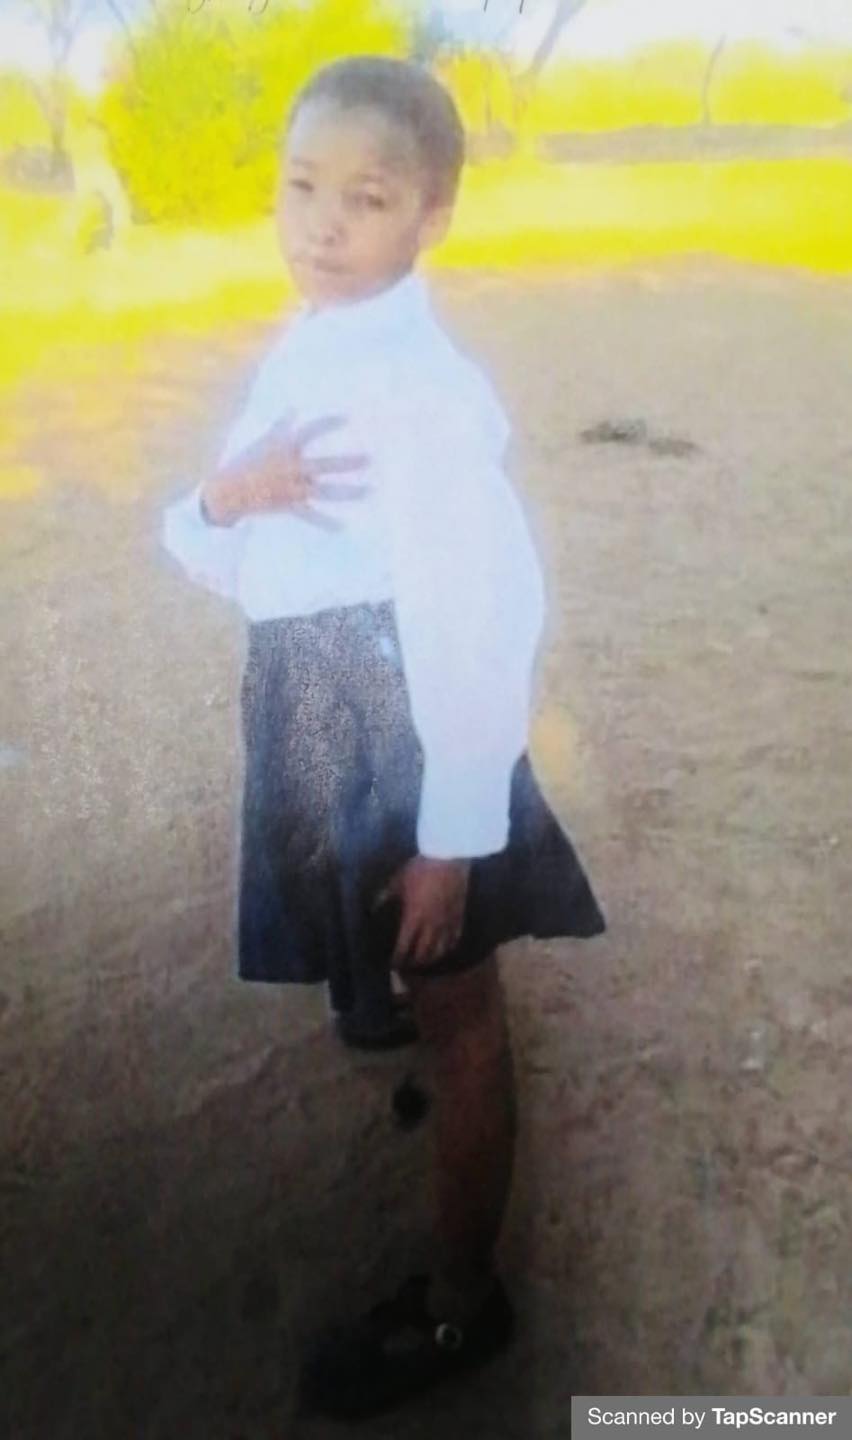 Police in Ganyesa, North West Province, searching fro a missing girl